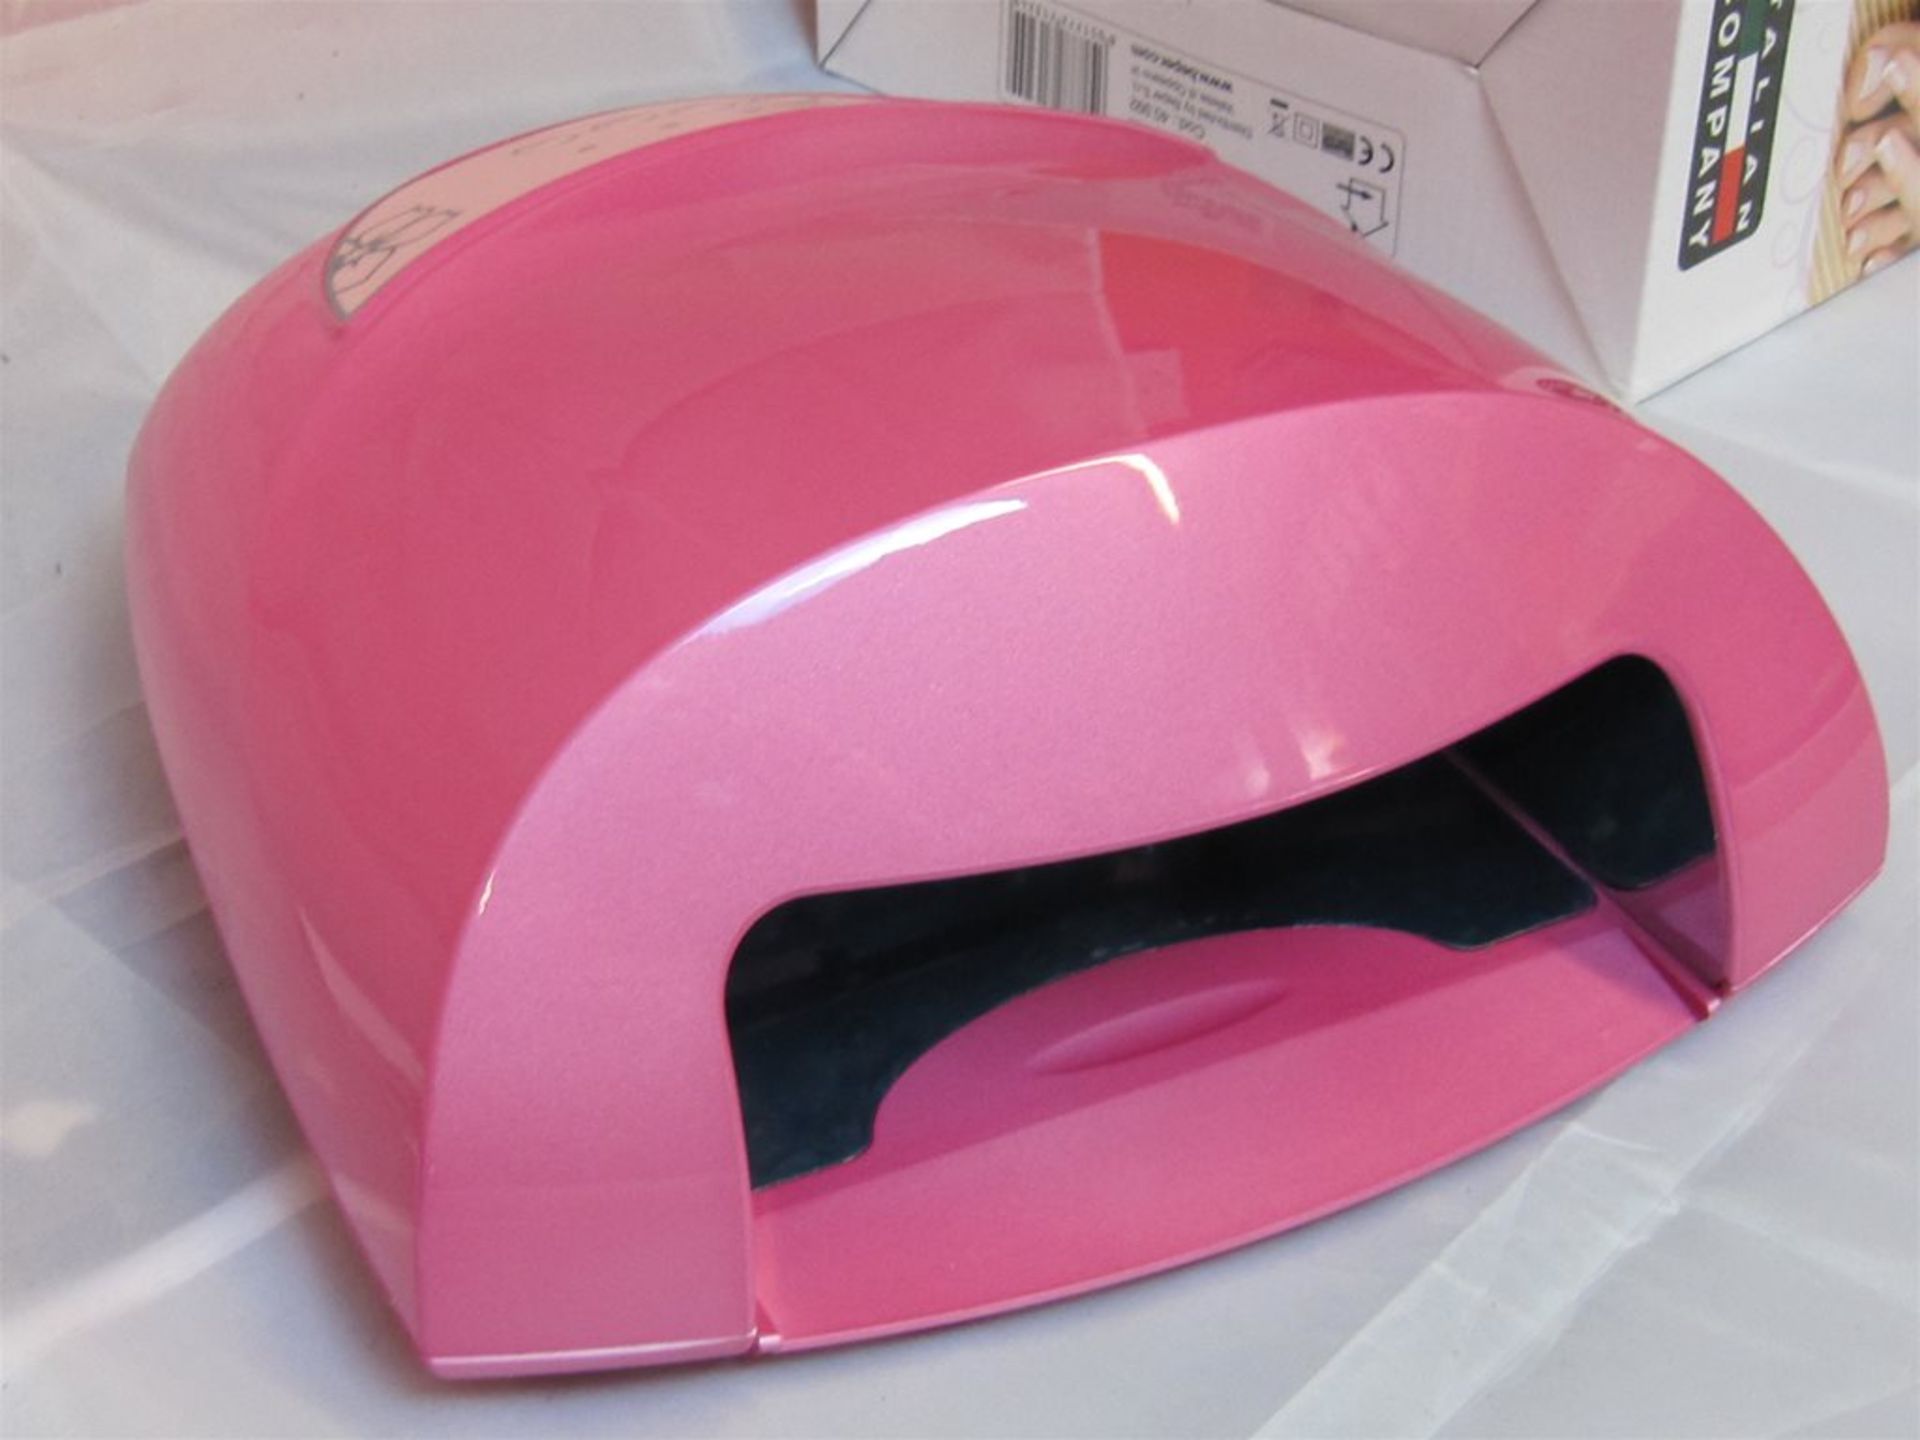 160) Beper LED Nail Lamp. 12w Rapid Dry Time. No vat on Hammer. - Image 3 of 4